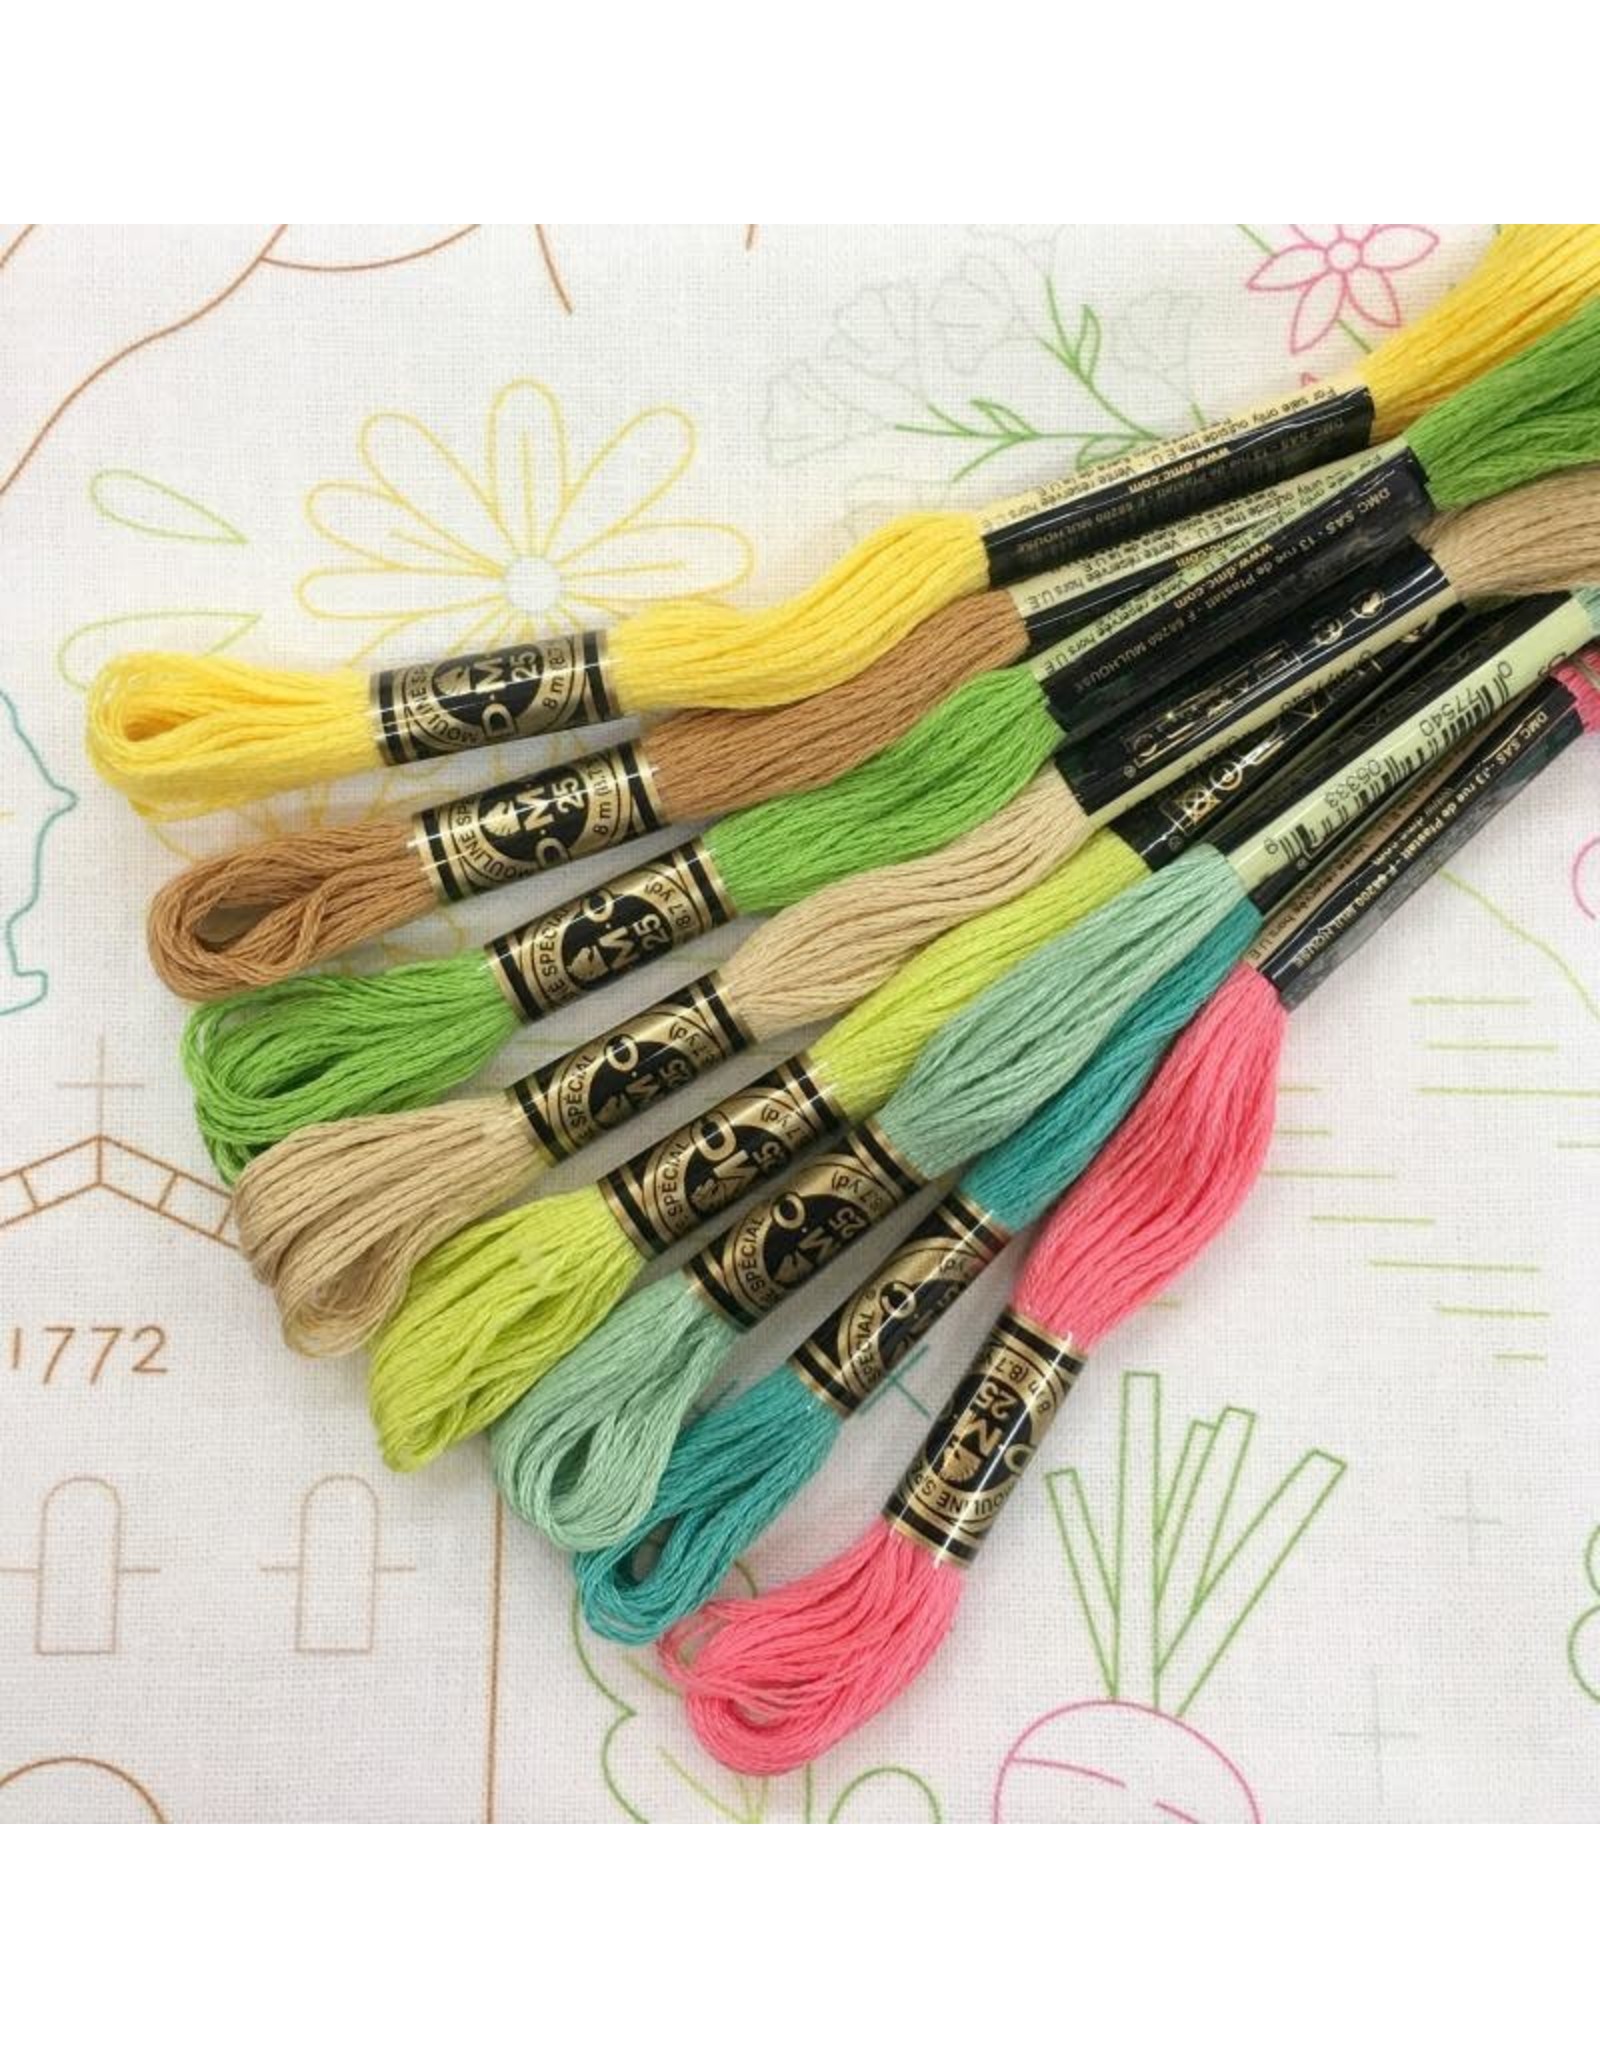 Cedar O'Reilly SLO City Embroidery Floss - Set of Eight 8.75 yard skeins